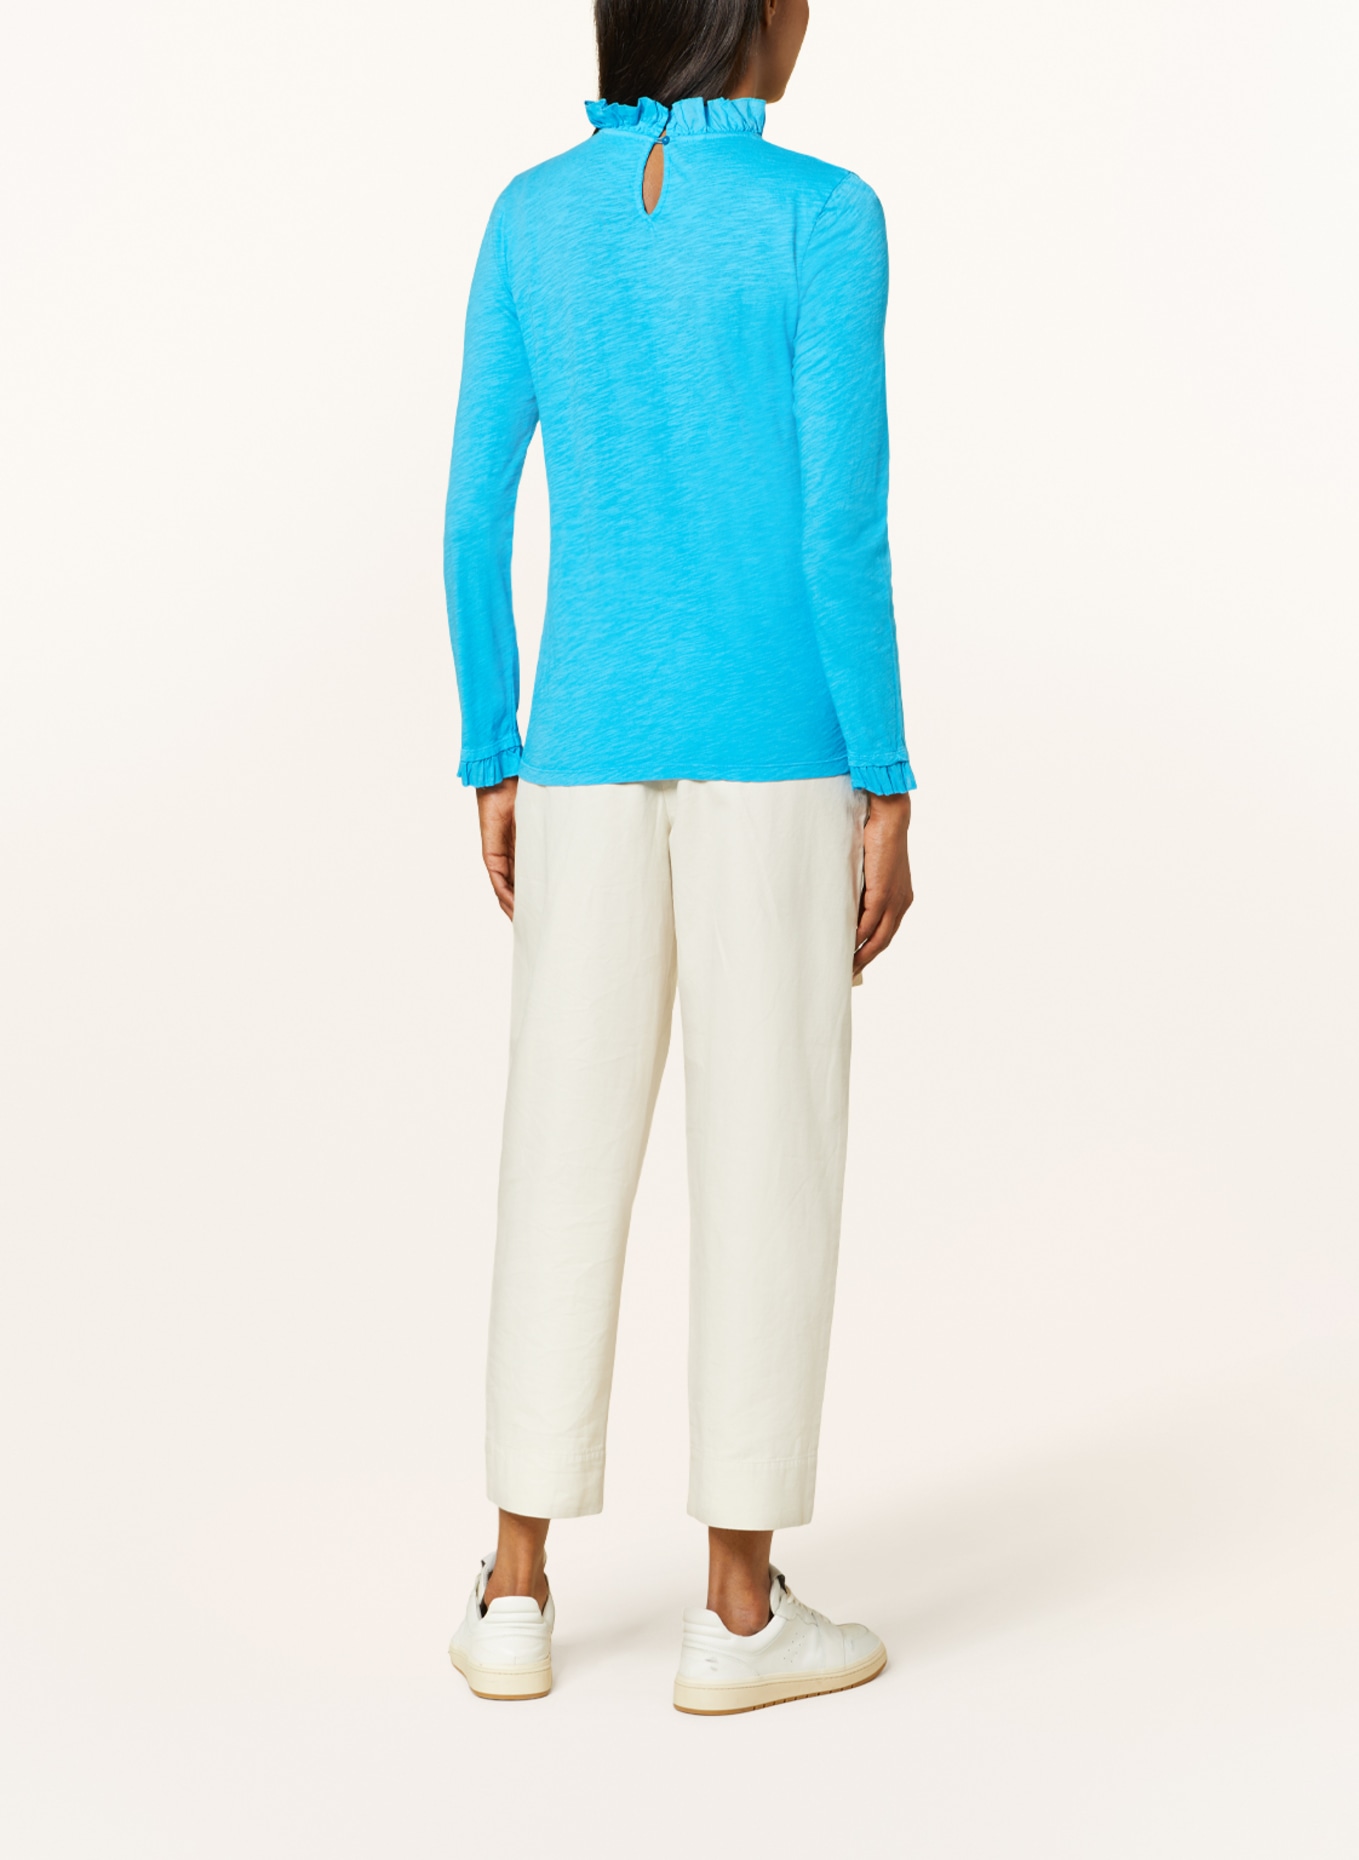 rich&royal Long sleeve shirt with ruffles, Color: TURQUOISE (Image 3)